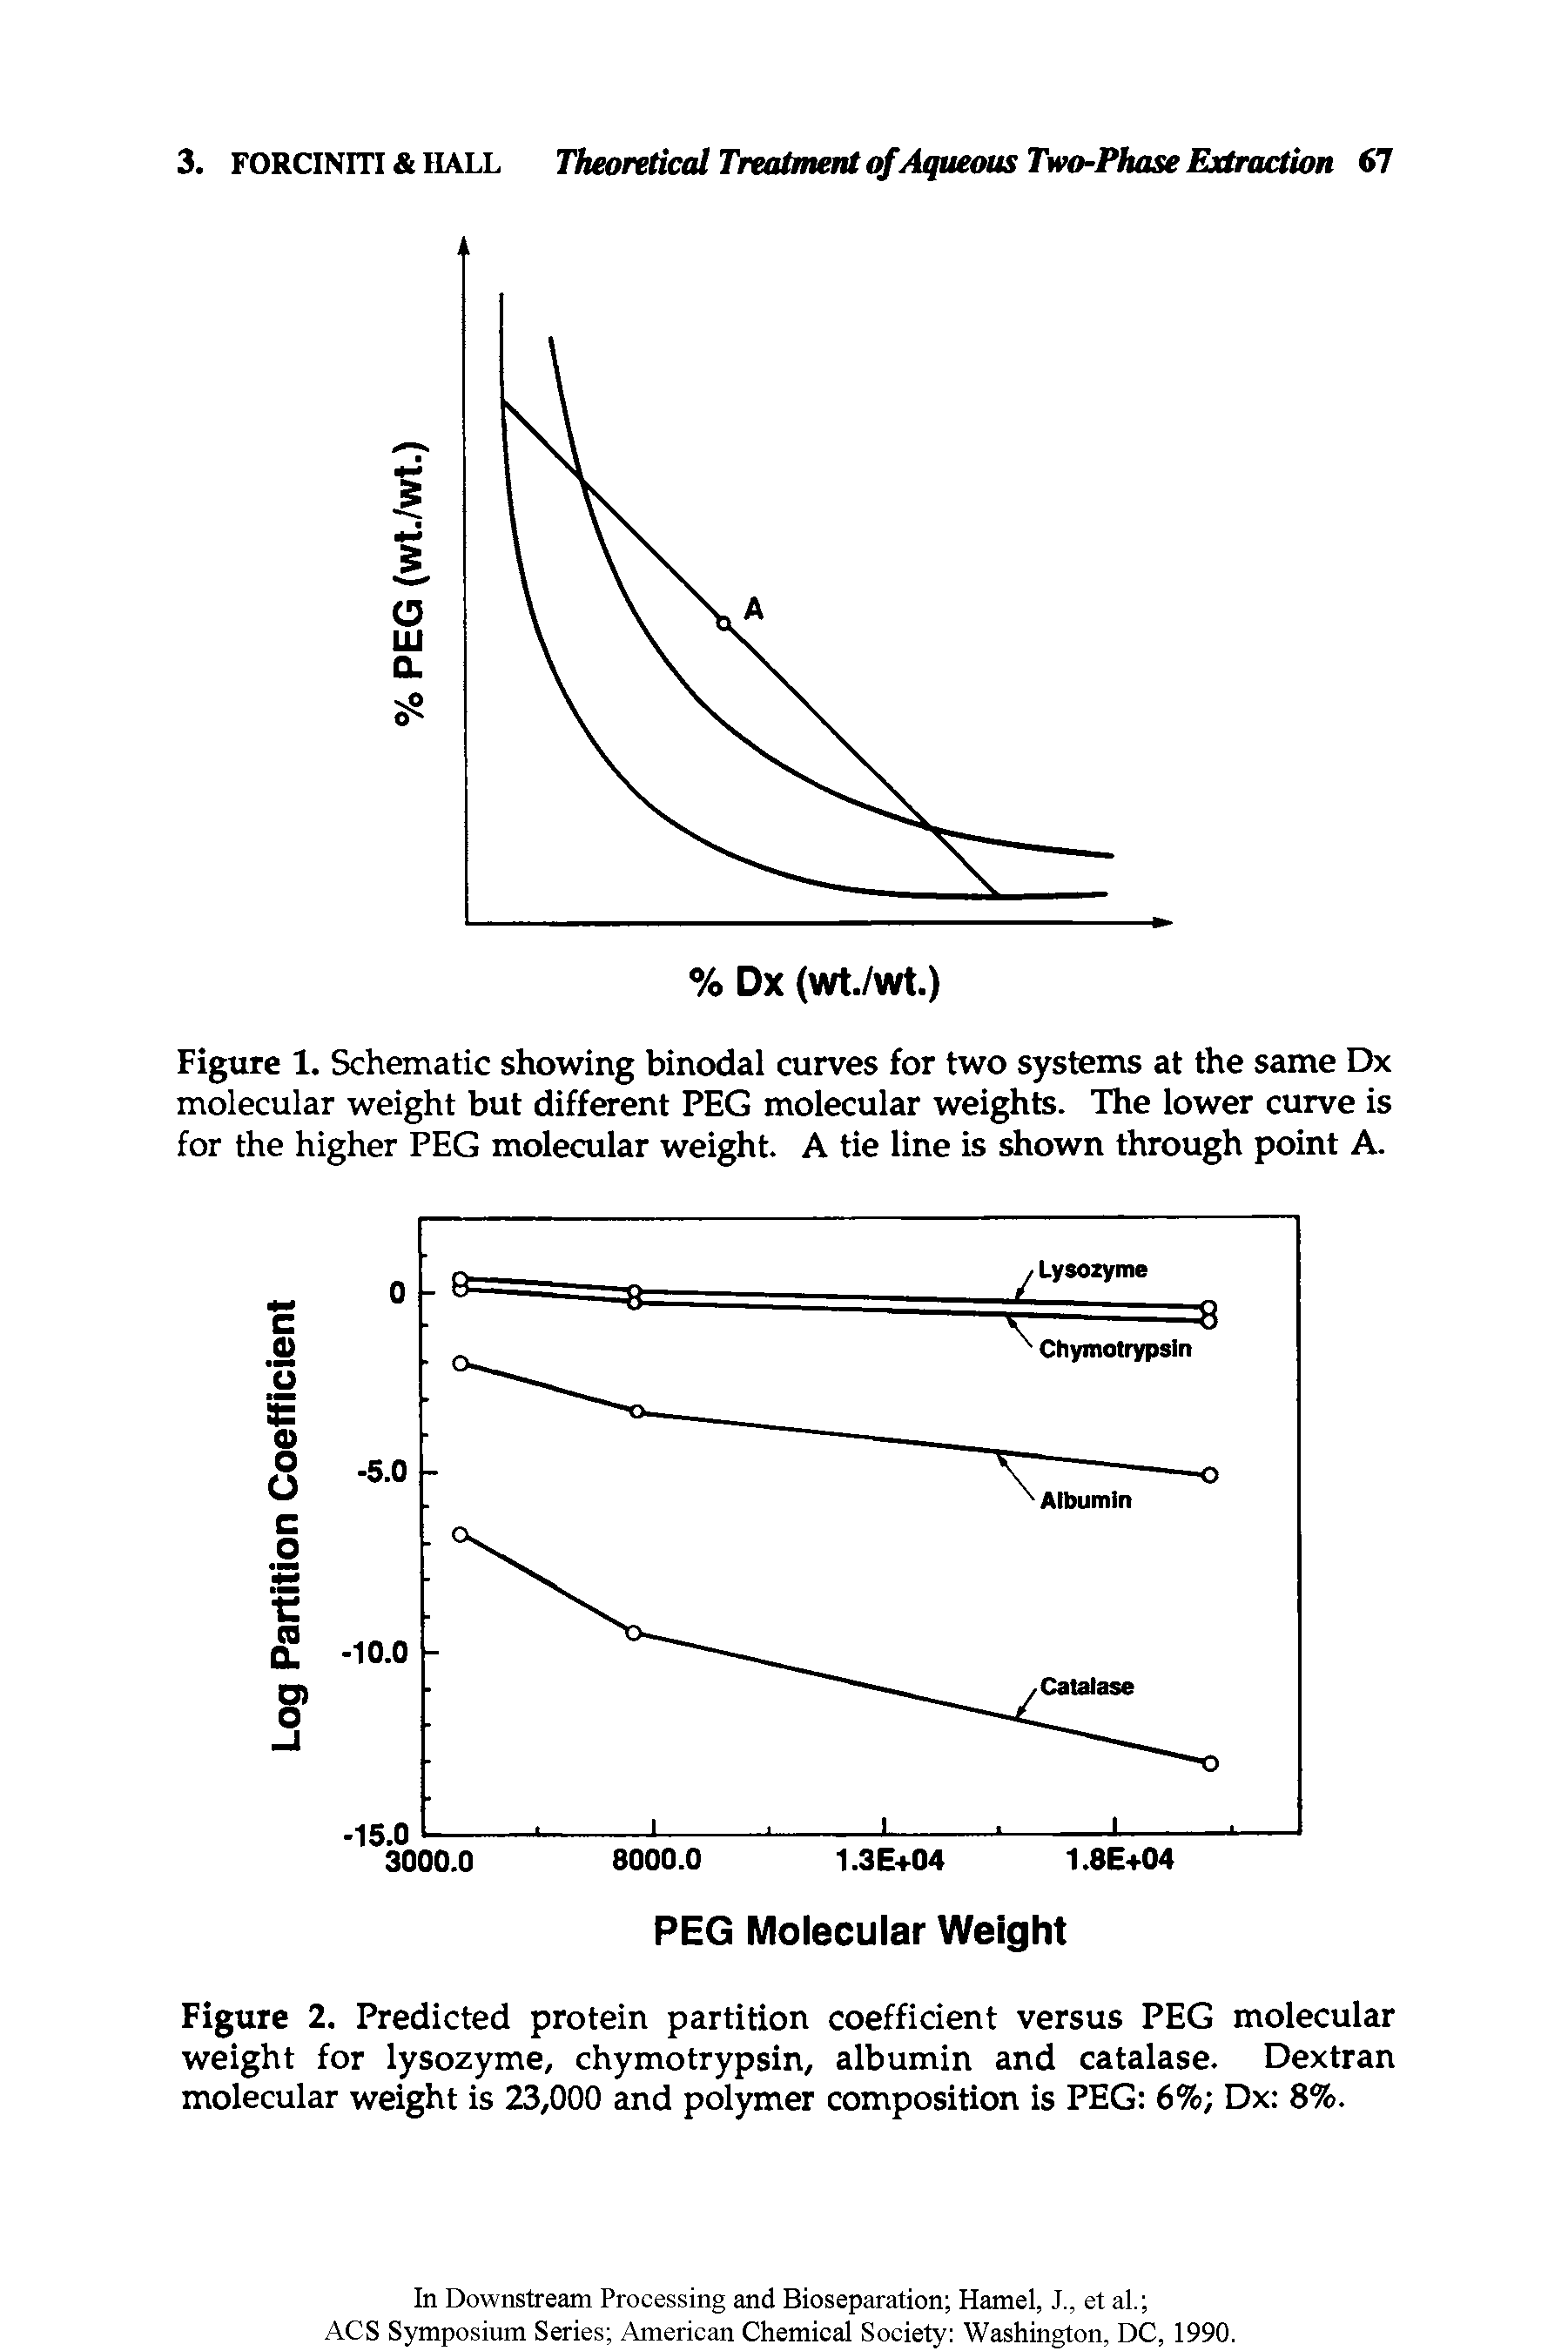 Figure 2. Predicted protein partition coefficient versus PEG molecular weight for lysozyme, chymotrypsin, albumin and catalase. Dextran molecular weight is 23,000 and polymer composition is PEG 6% Dx 8%.